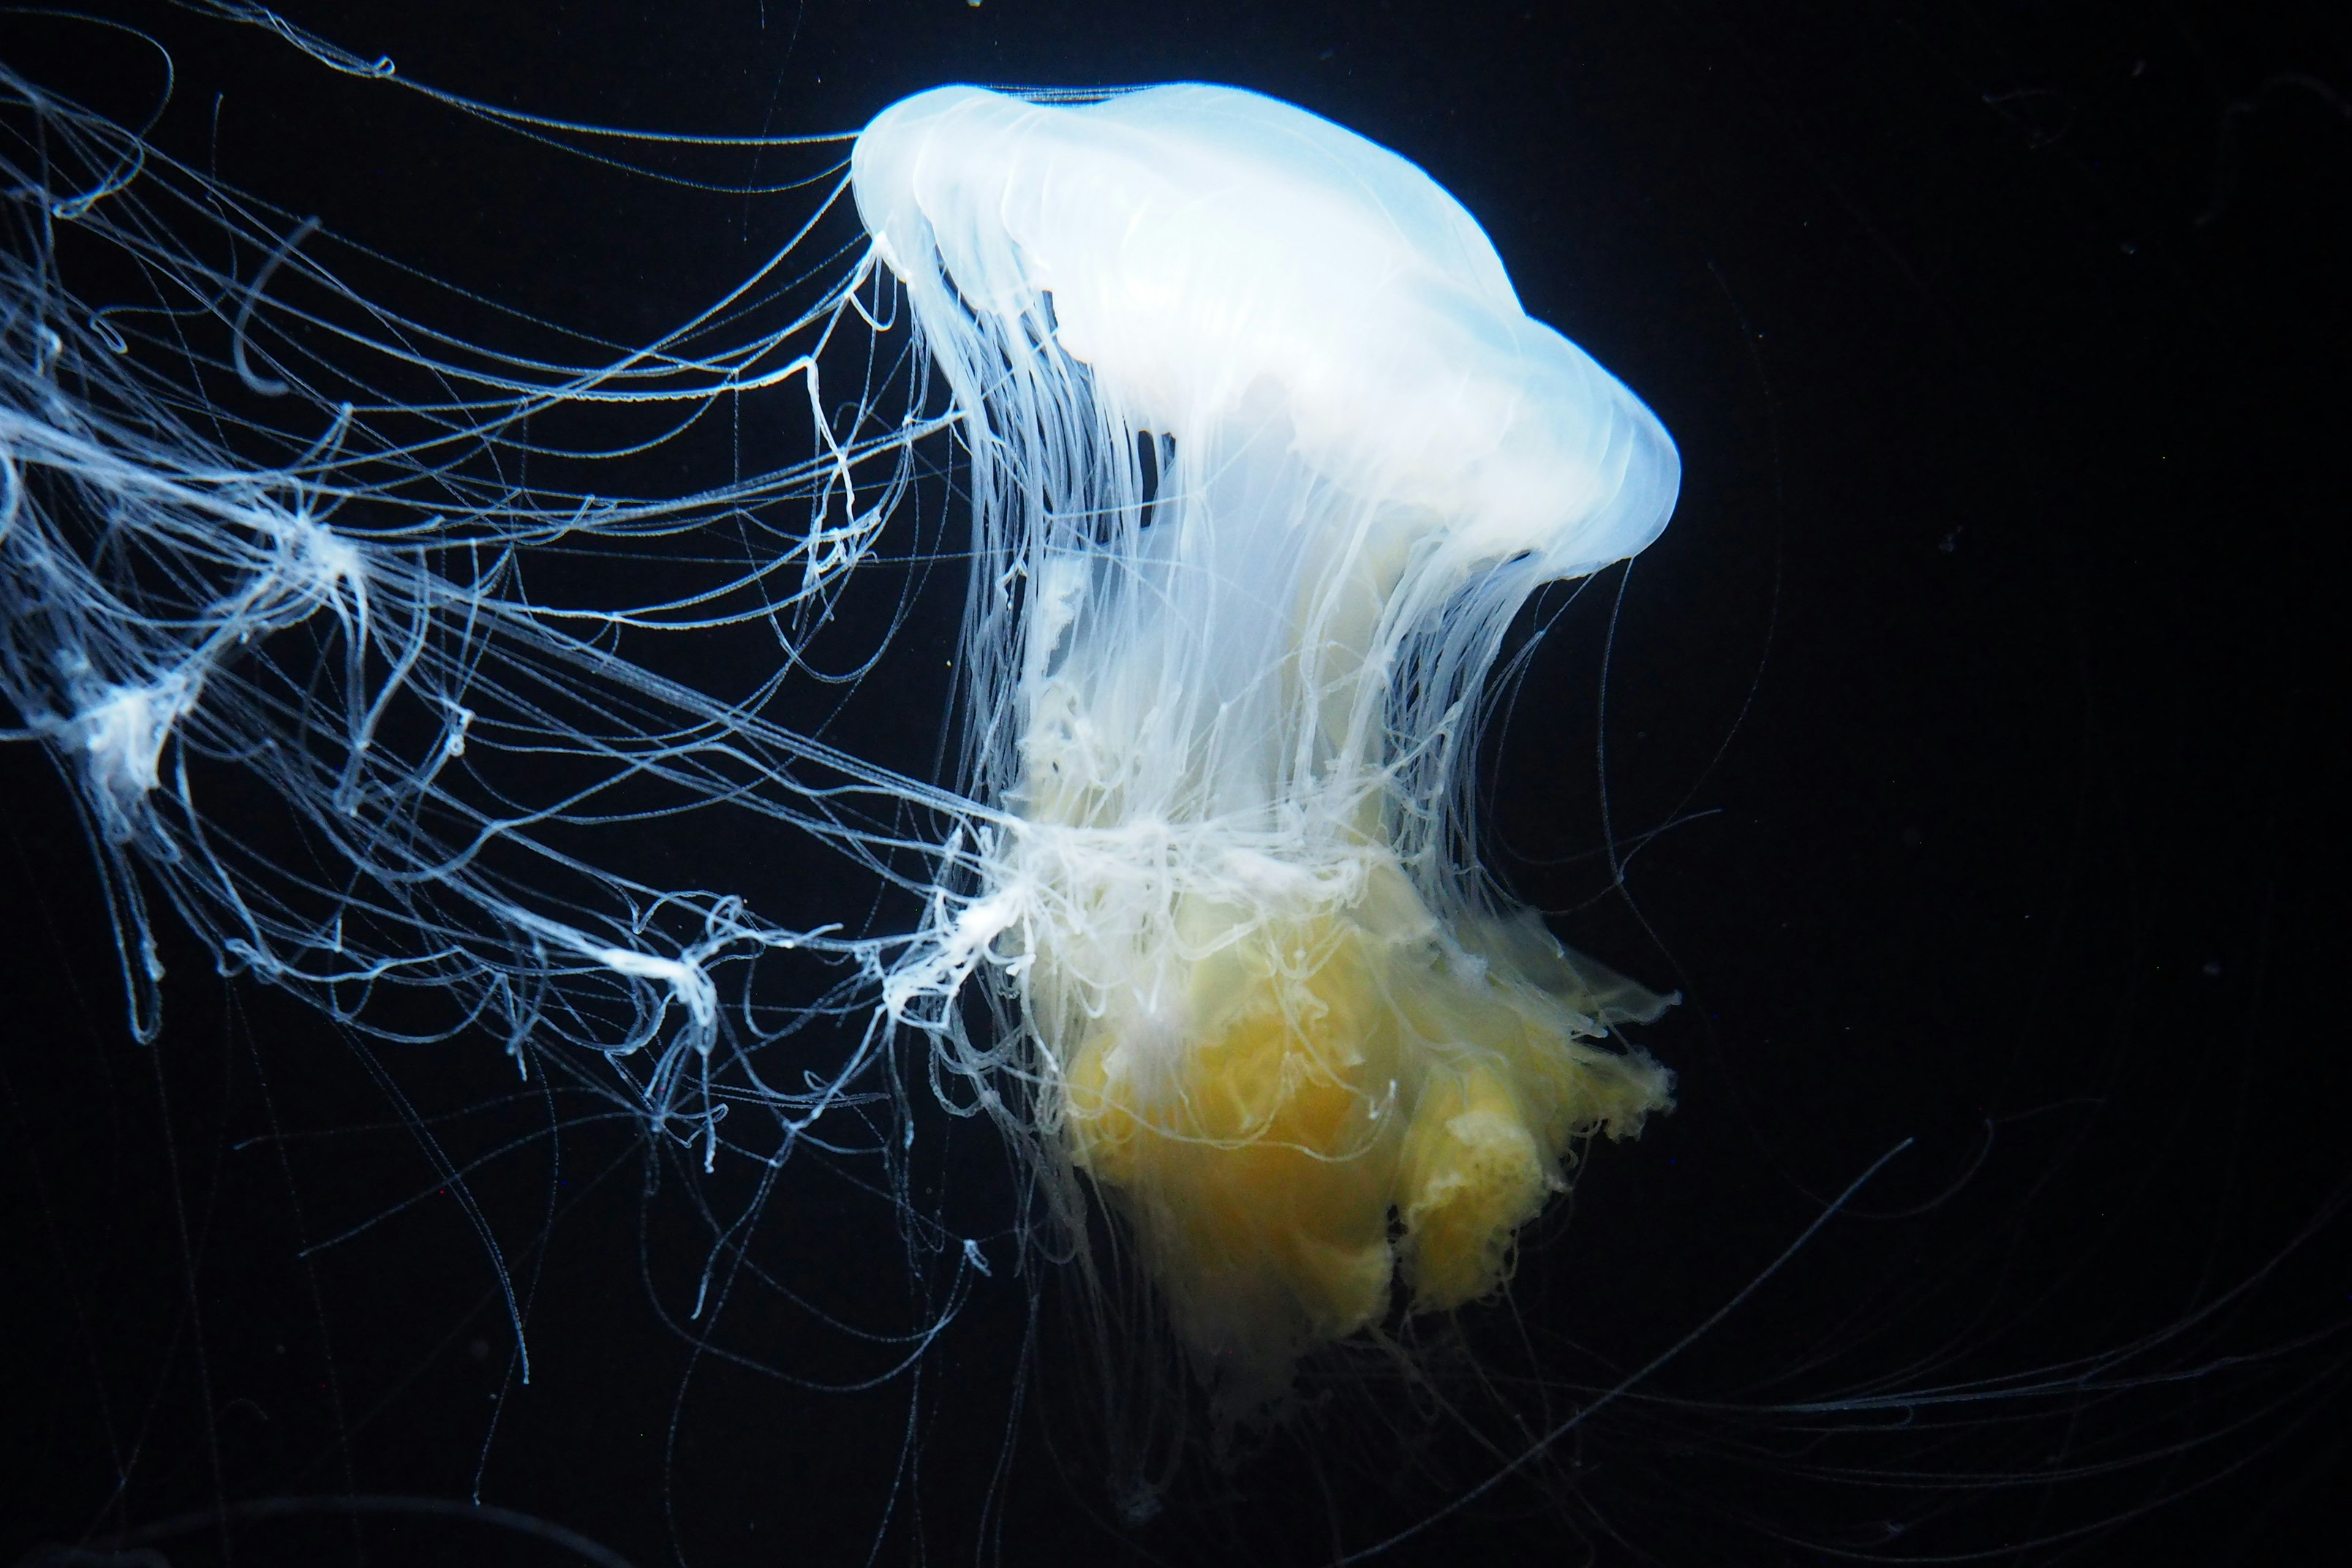 white jellyfish in close up photography